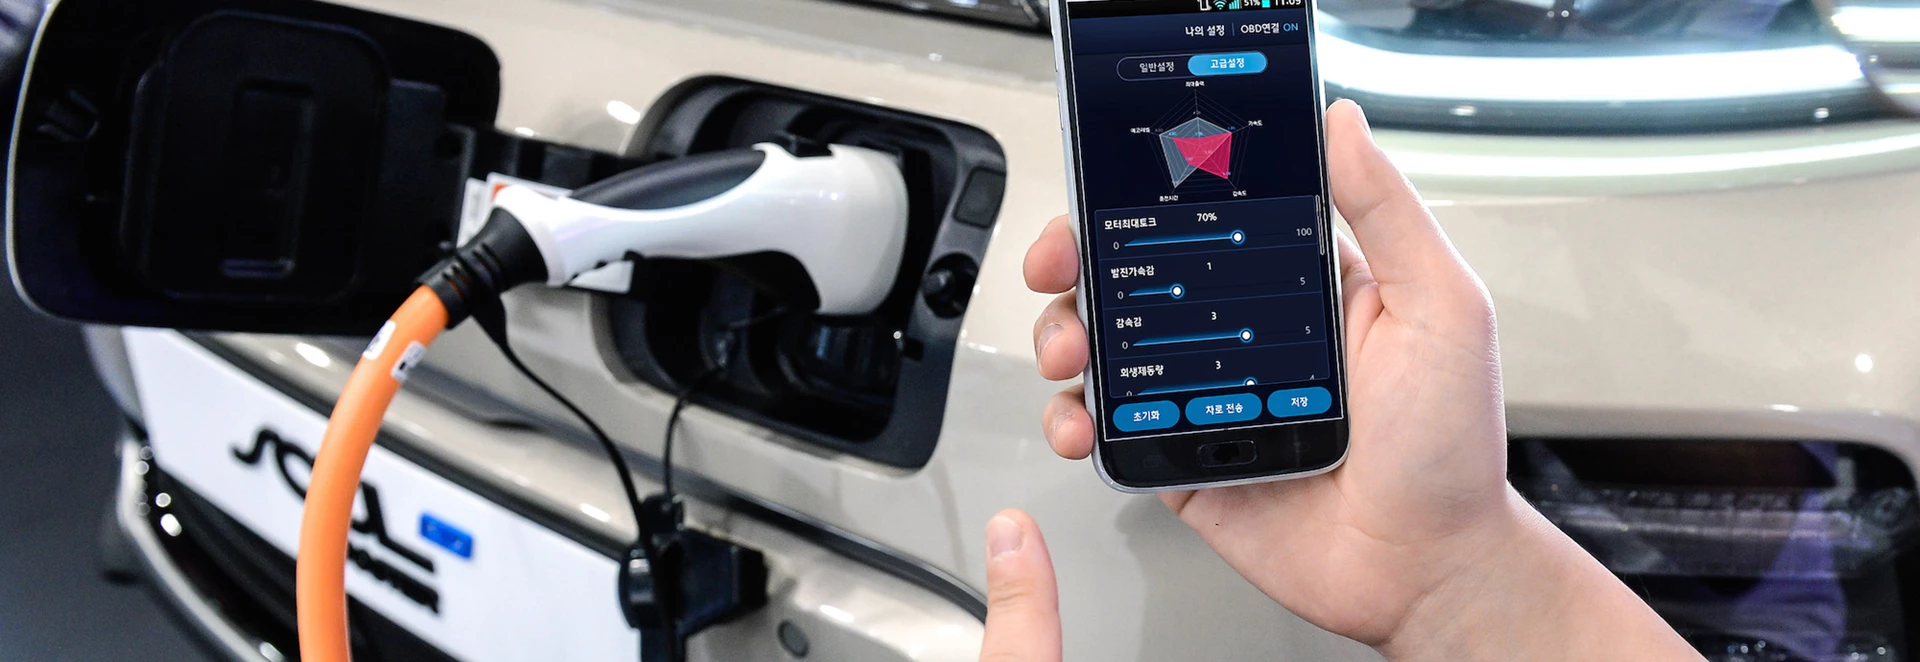 Hyundai introduce smartphone performance control for electric cars 